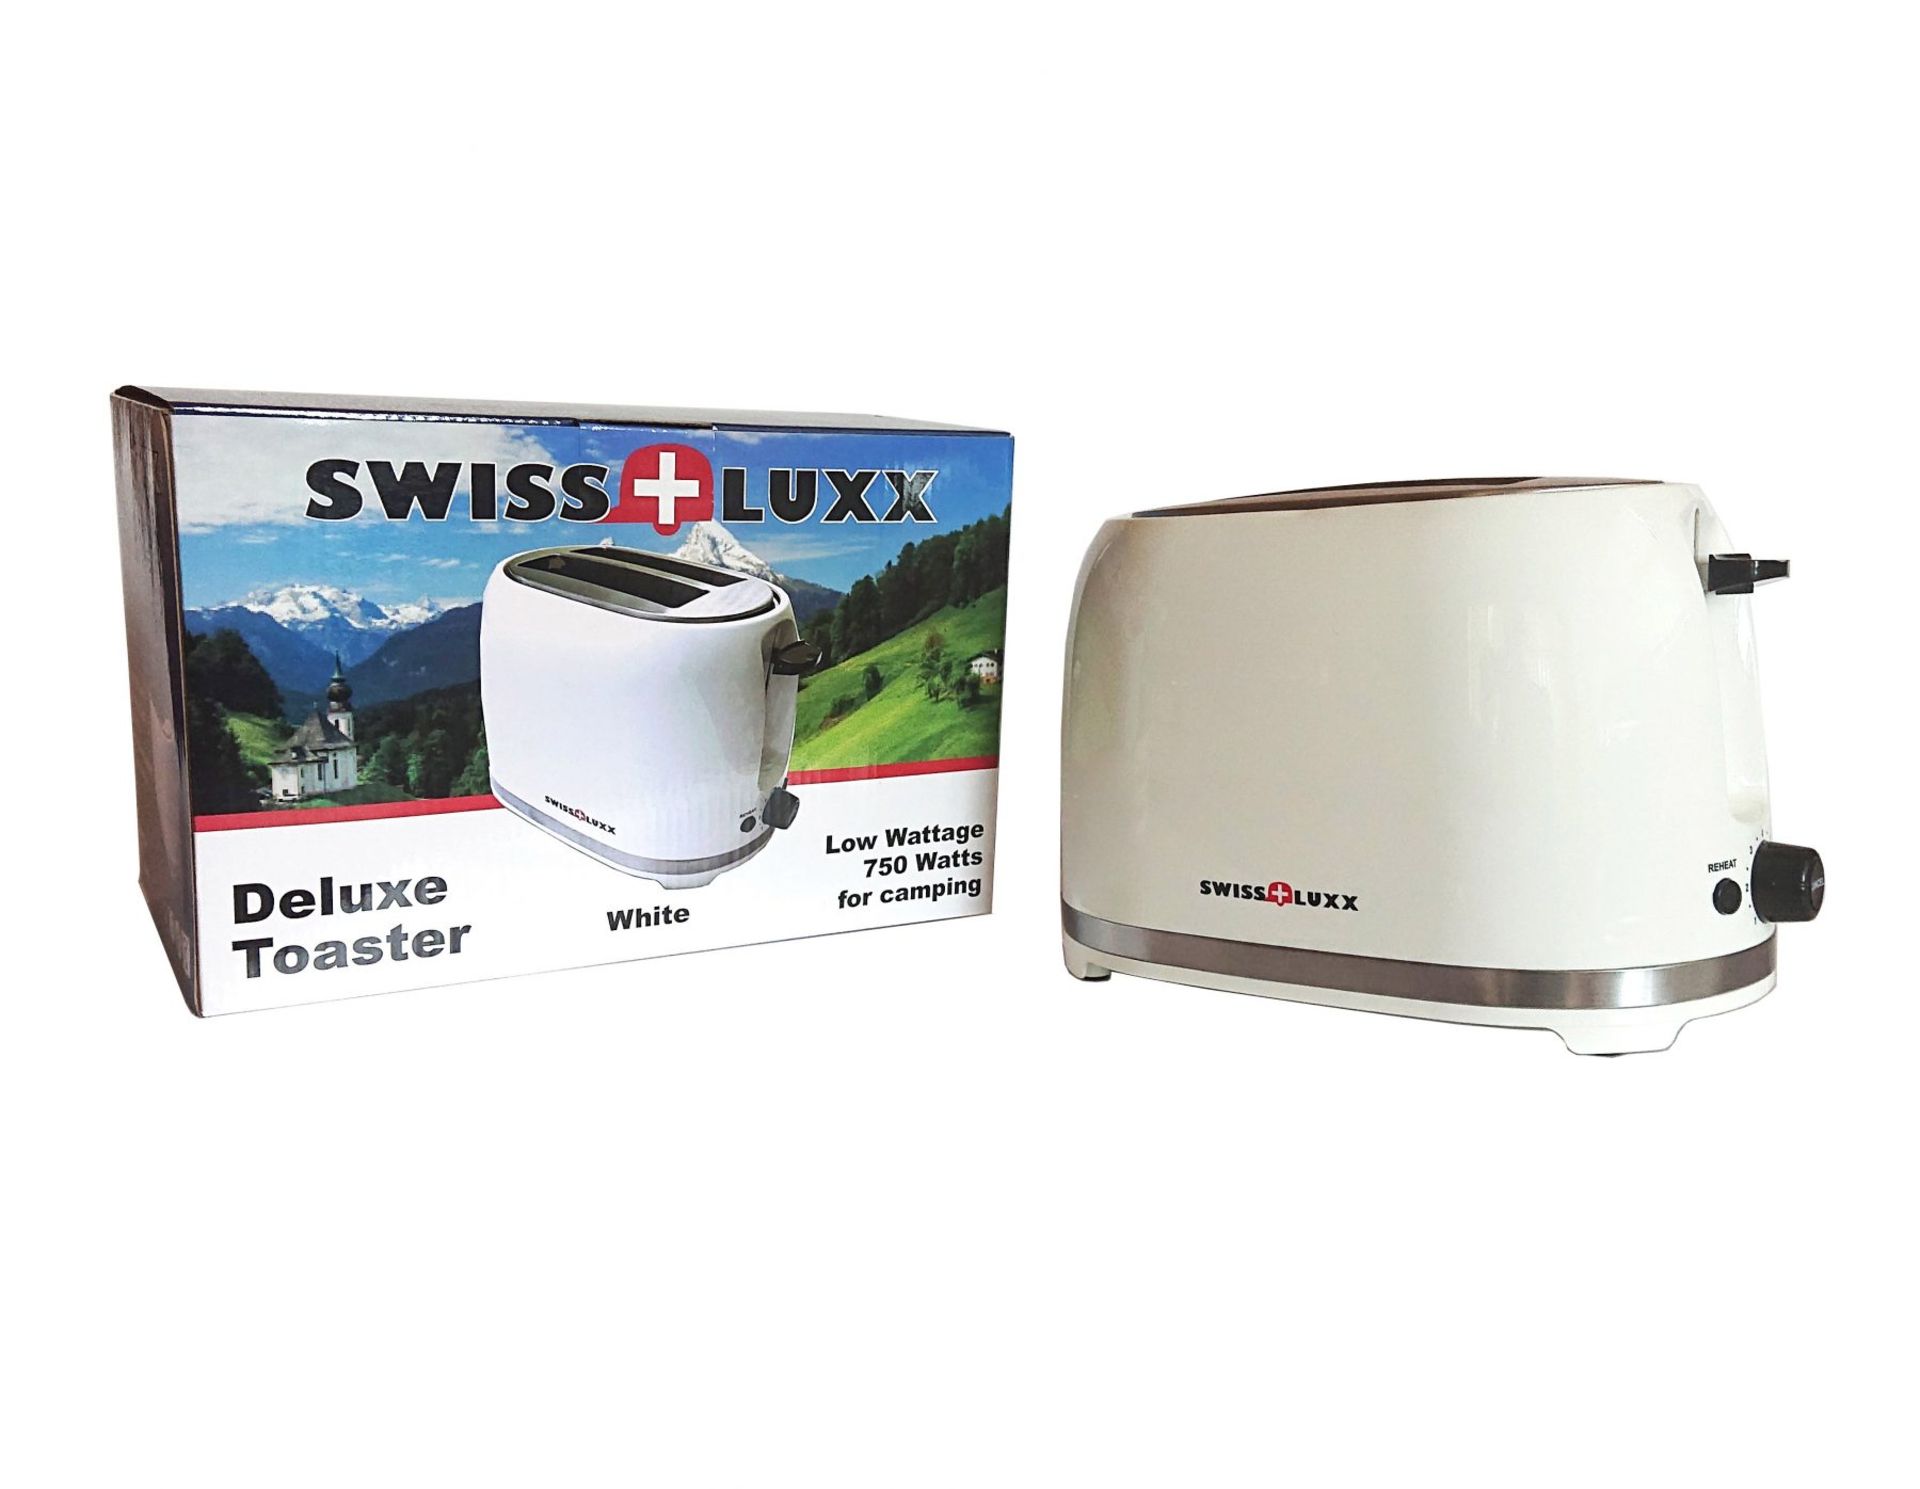 Swiss Luxx Deluxe 750W Camping Toaster White - 2-slice low wattage toaster, 220-240V power - Image 2 of 2